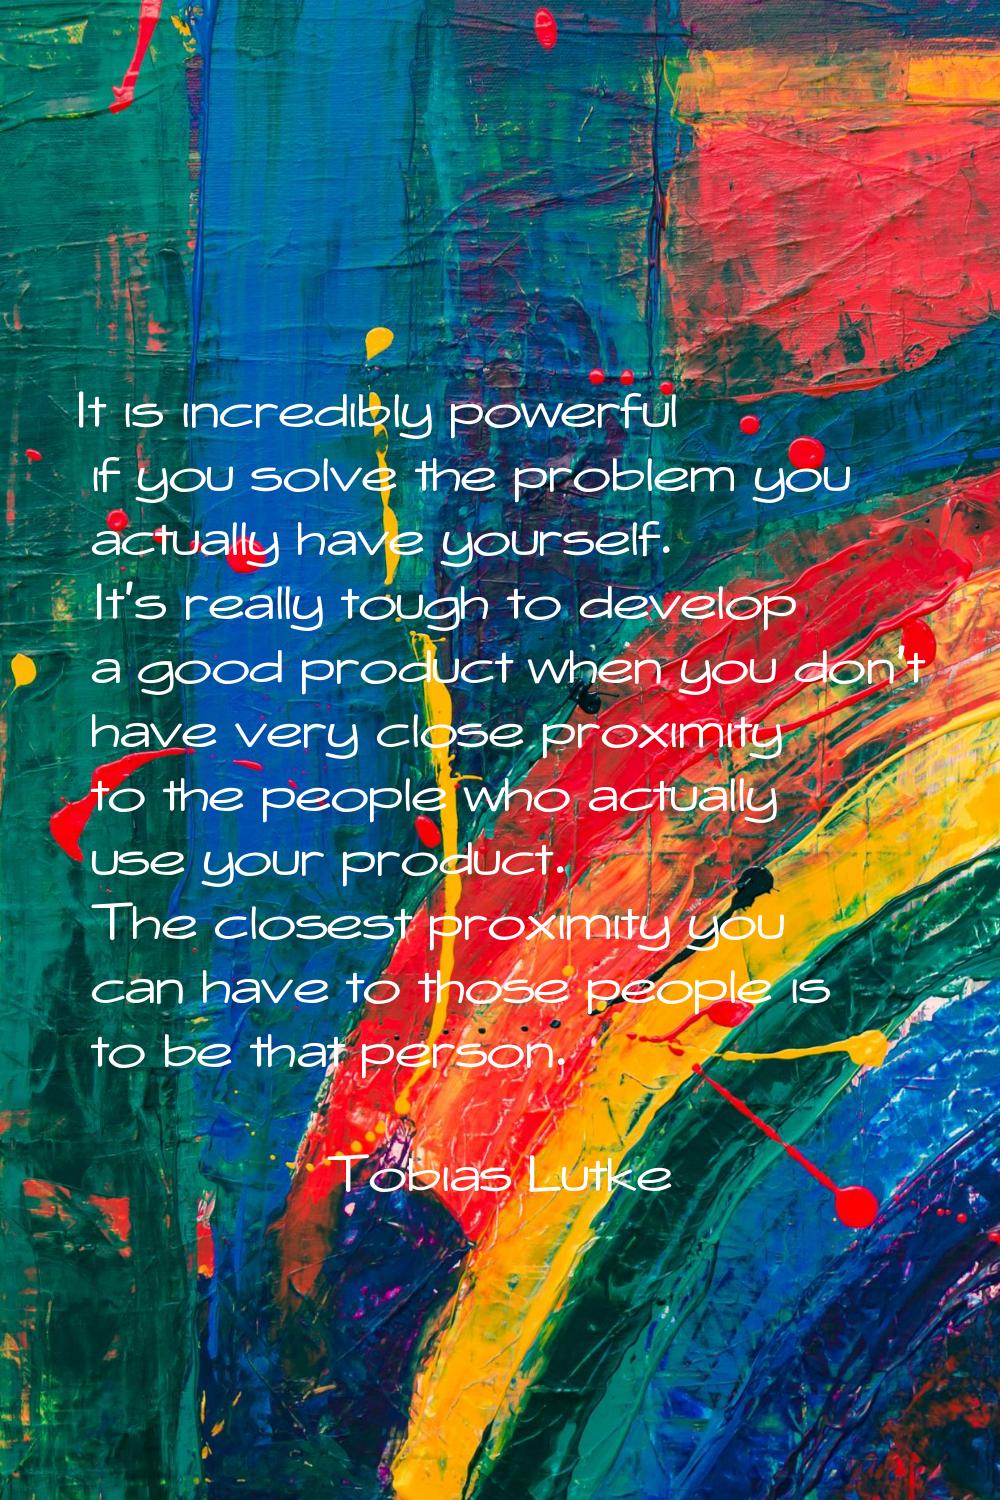 It is incredibly powerful if you solve the problem you actually have yourself. It's really tough to